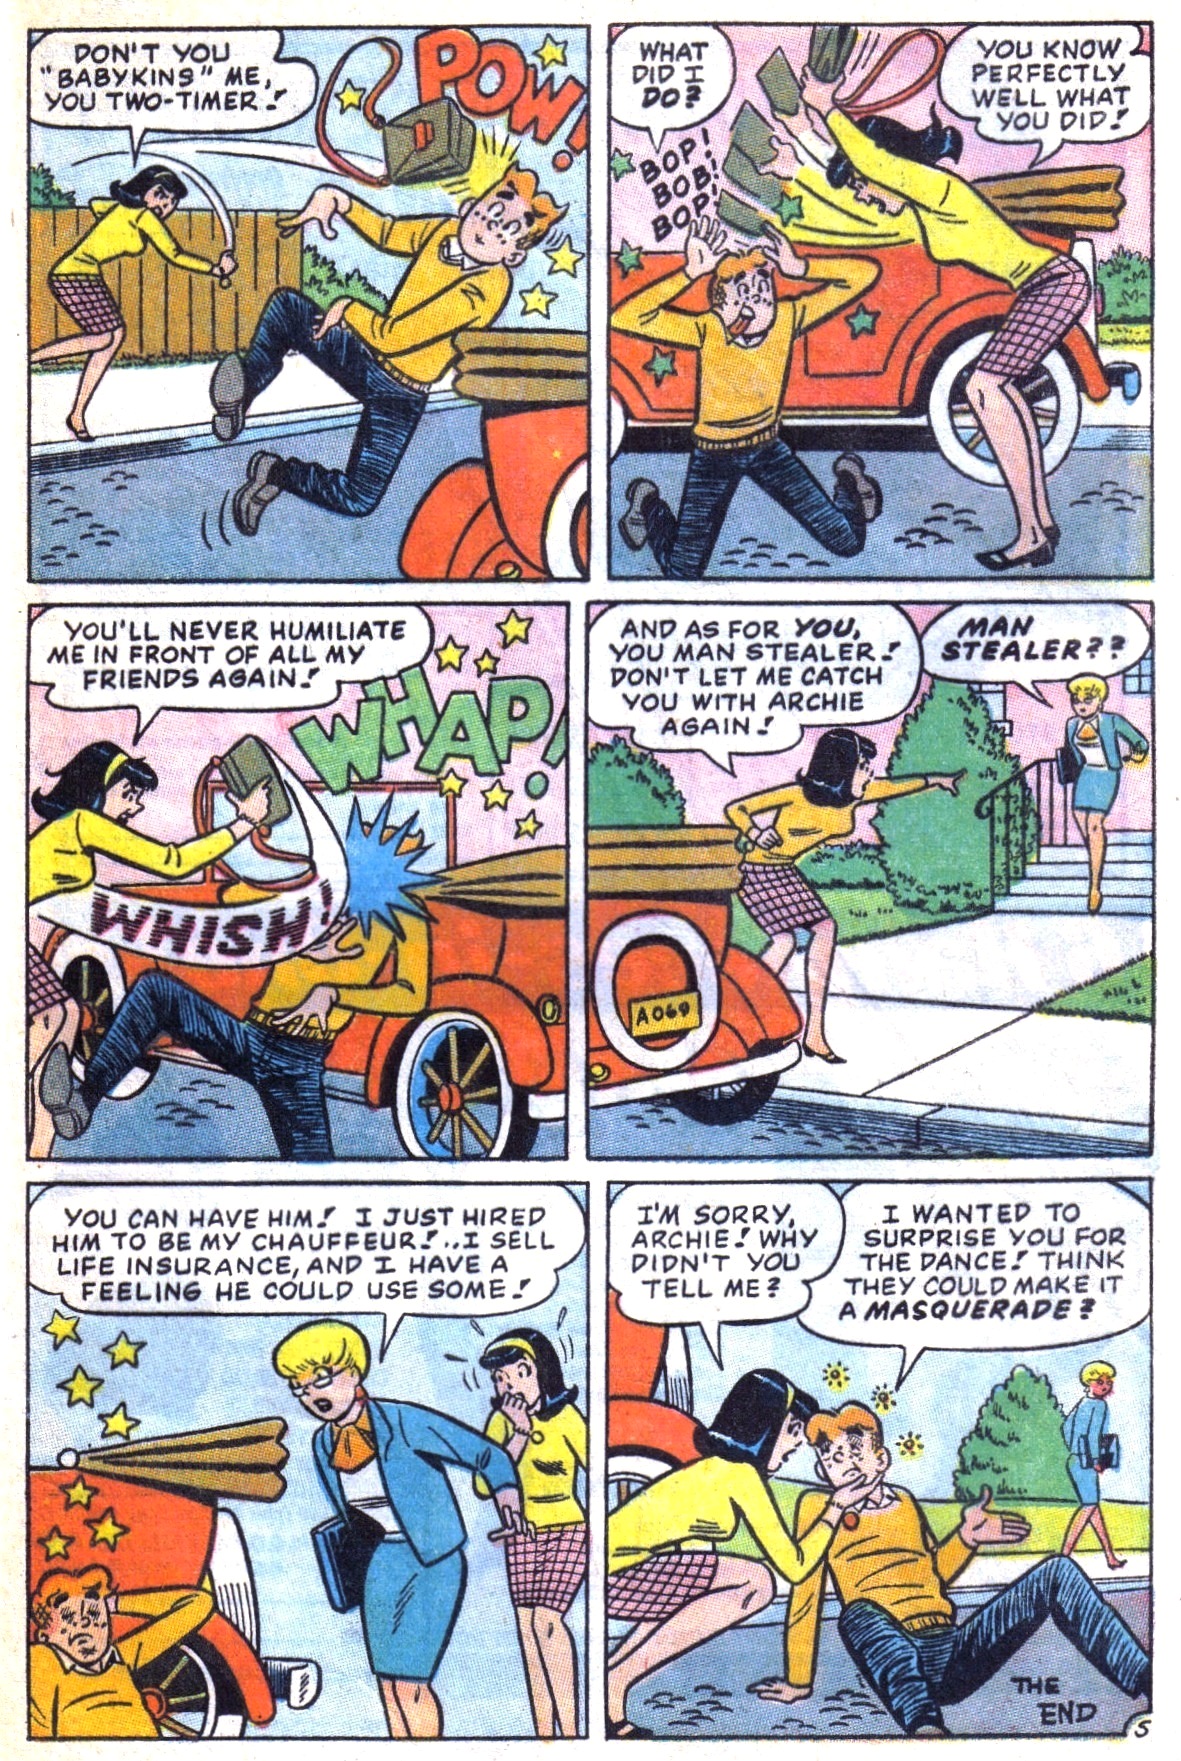 Archie (1960) 174 Page 33